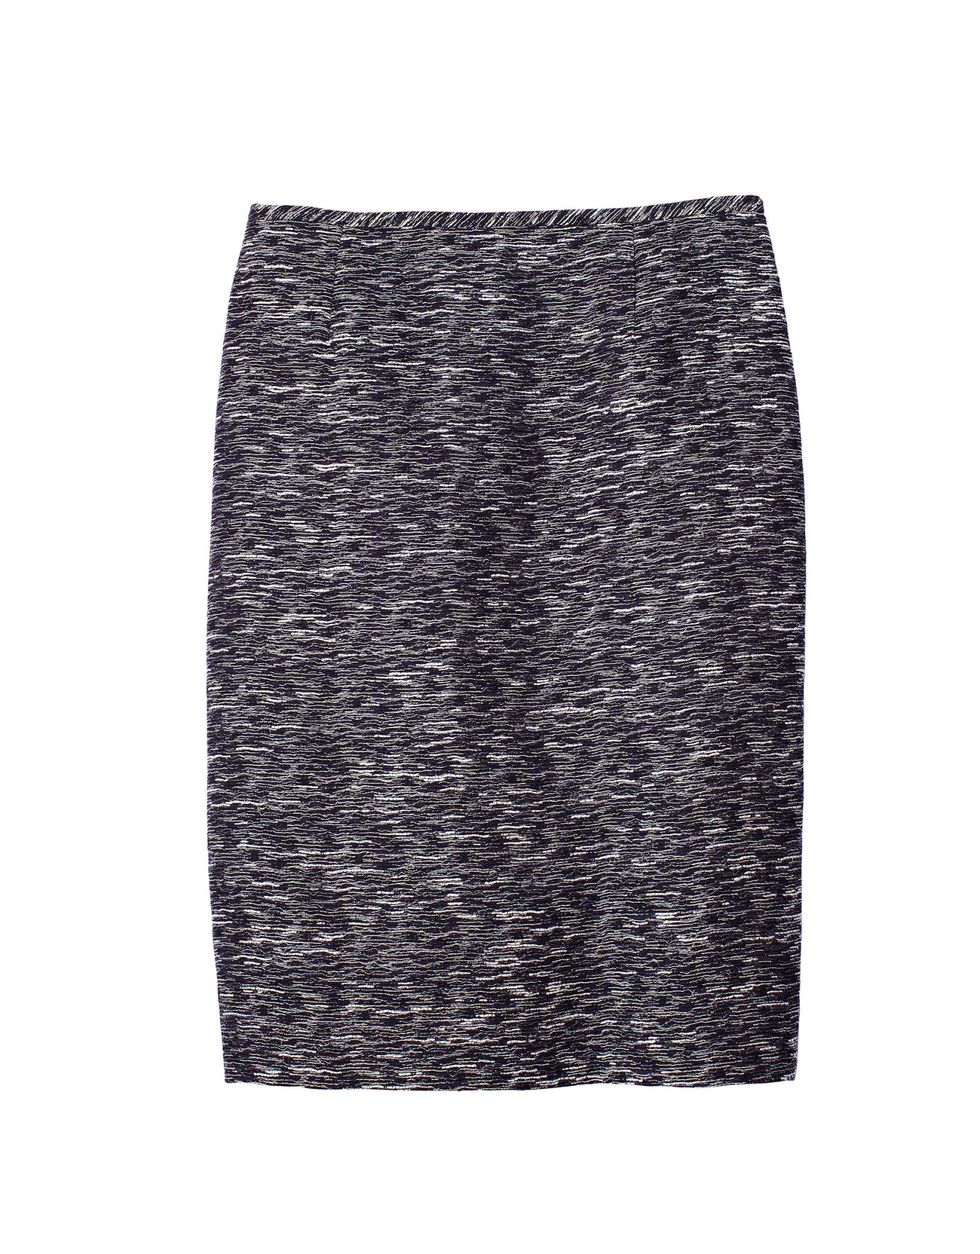 Flattering Pencil Skirts For Every Body Type - Iconic Celebrity Style